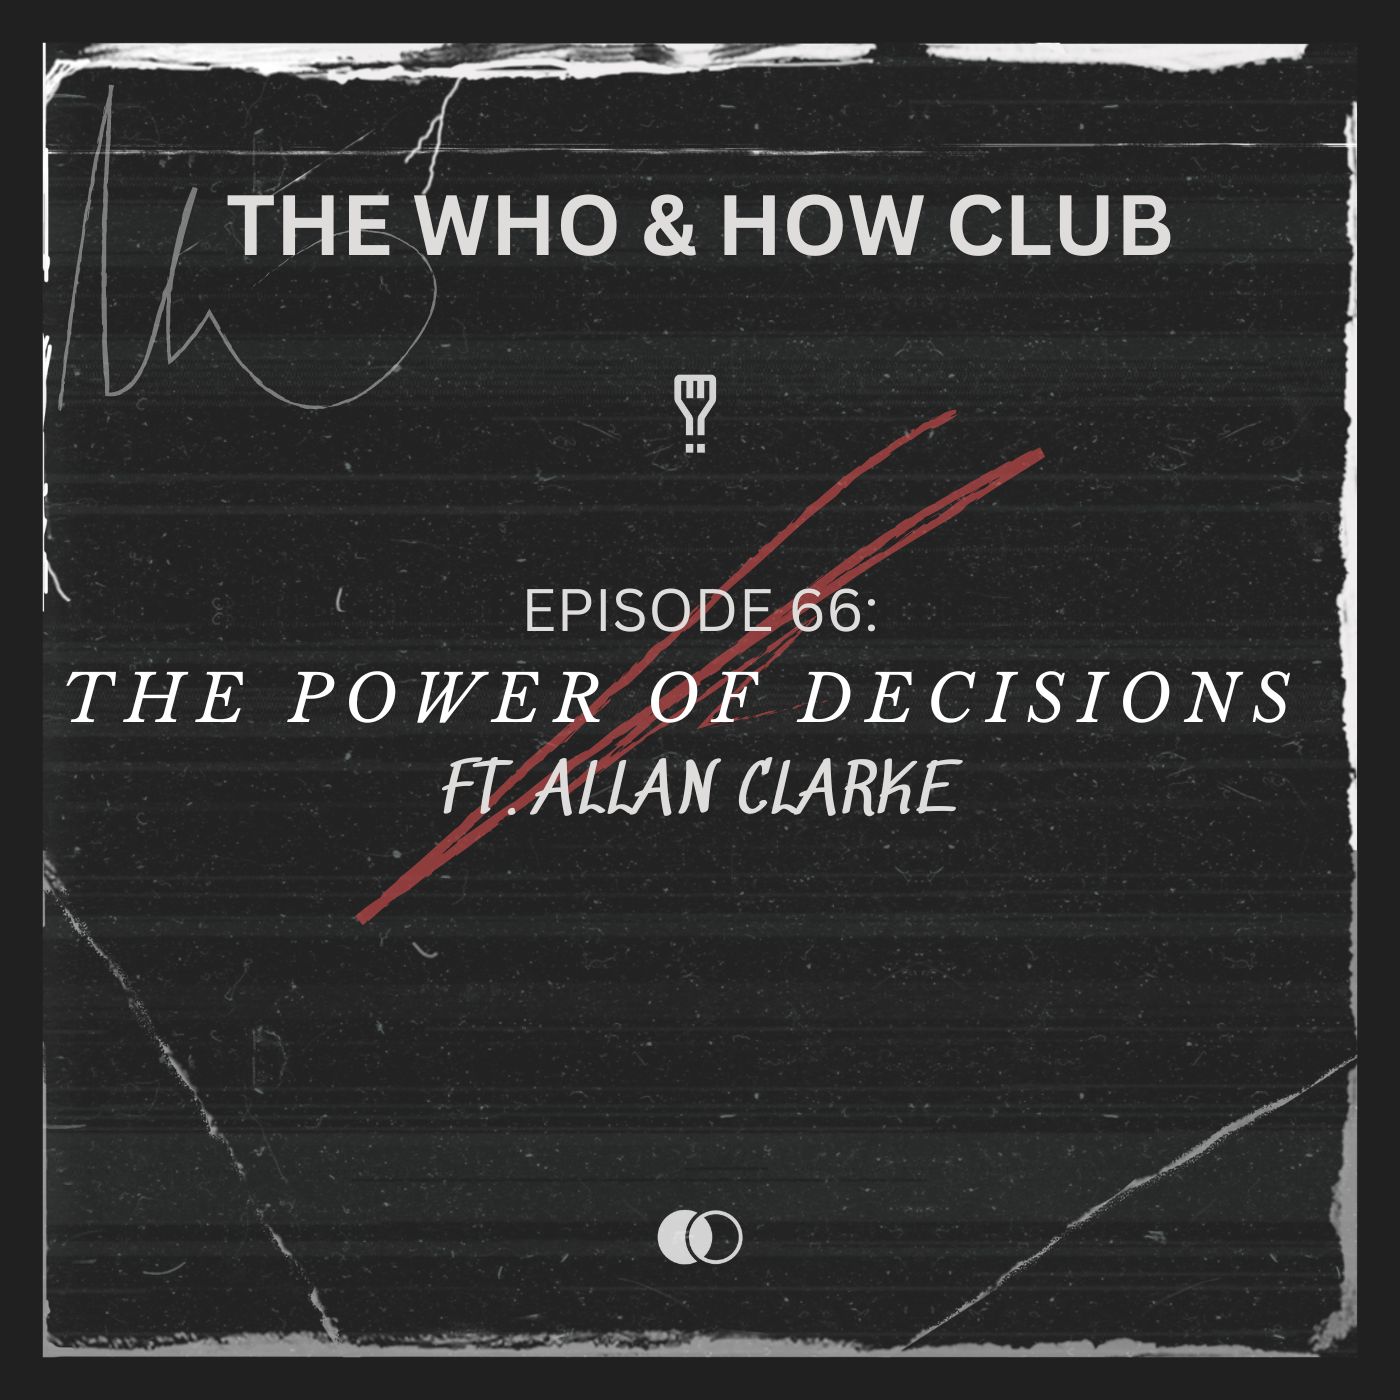 Episode 66: The Power of Decisions (Ft. Allan Clarke)